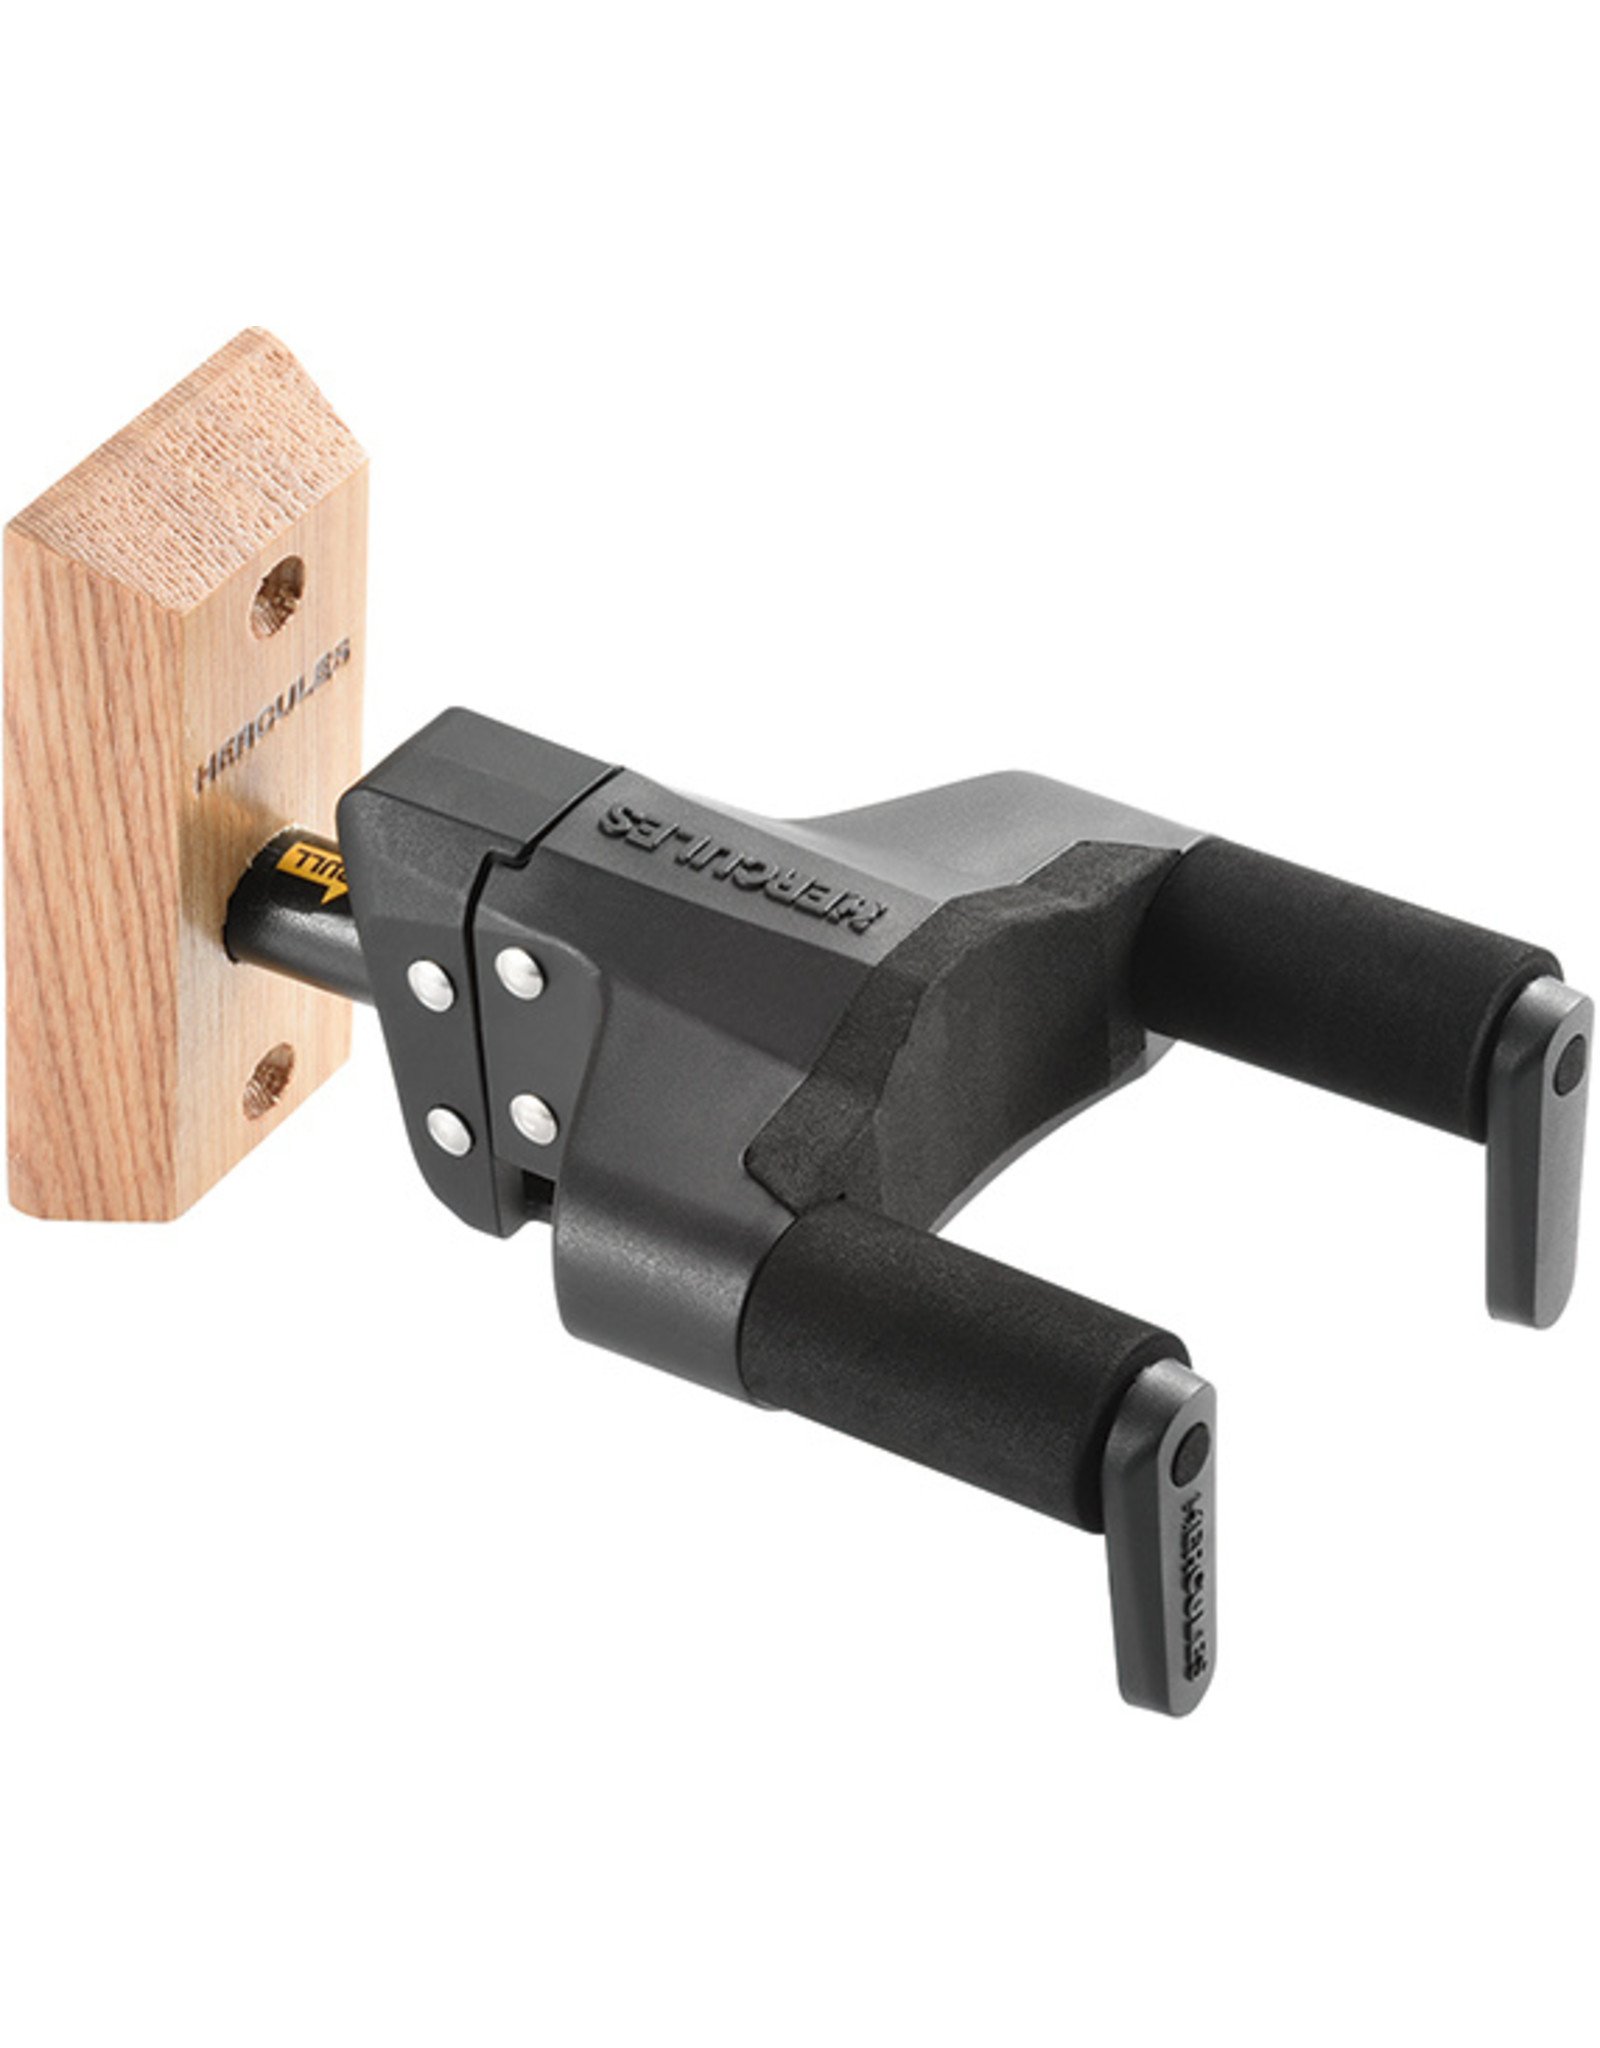 Hercules Hercules Natural GII AutoGrip Guitar Hanger for Wall Mounting with Wood Base, Short Arm